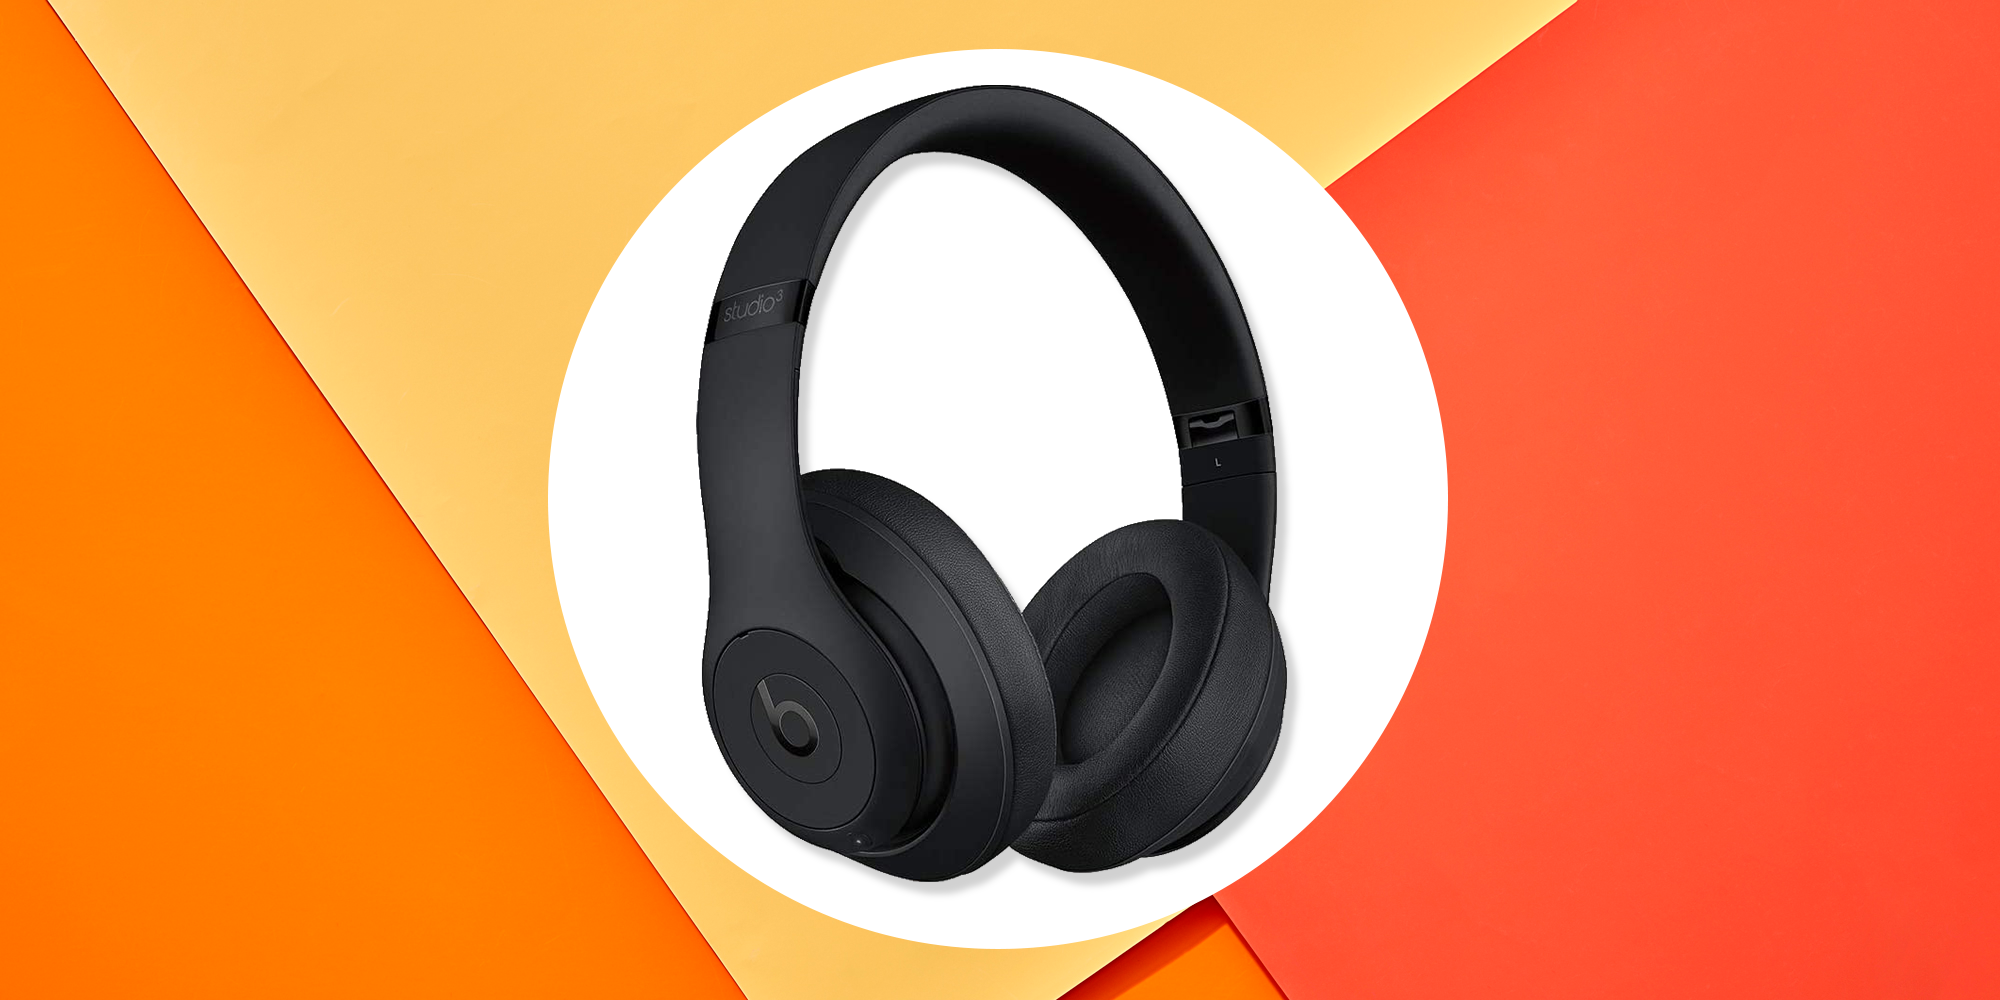 Beats Headphone Sale: Score $150 For President's Day On